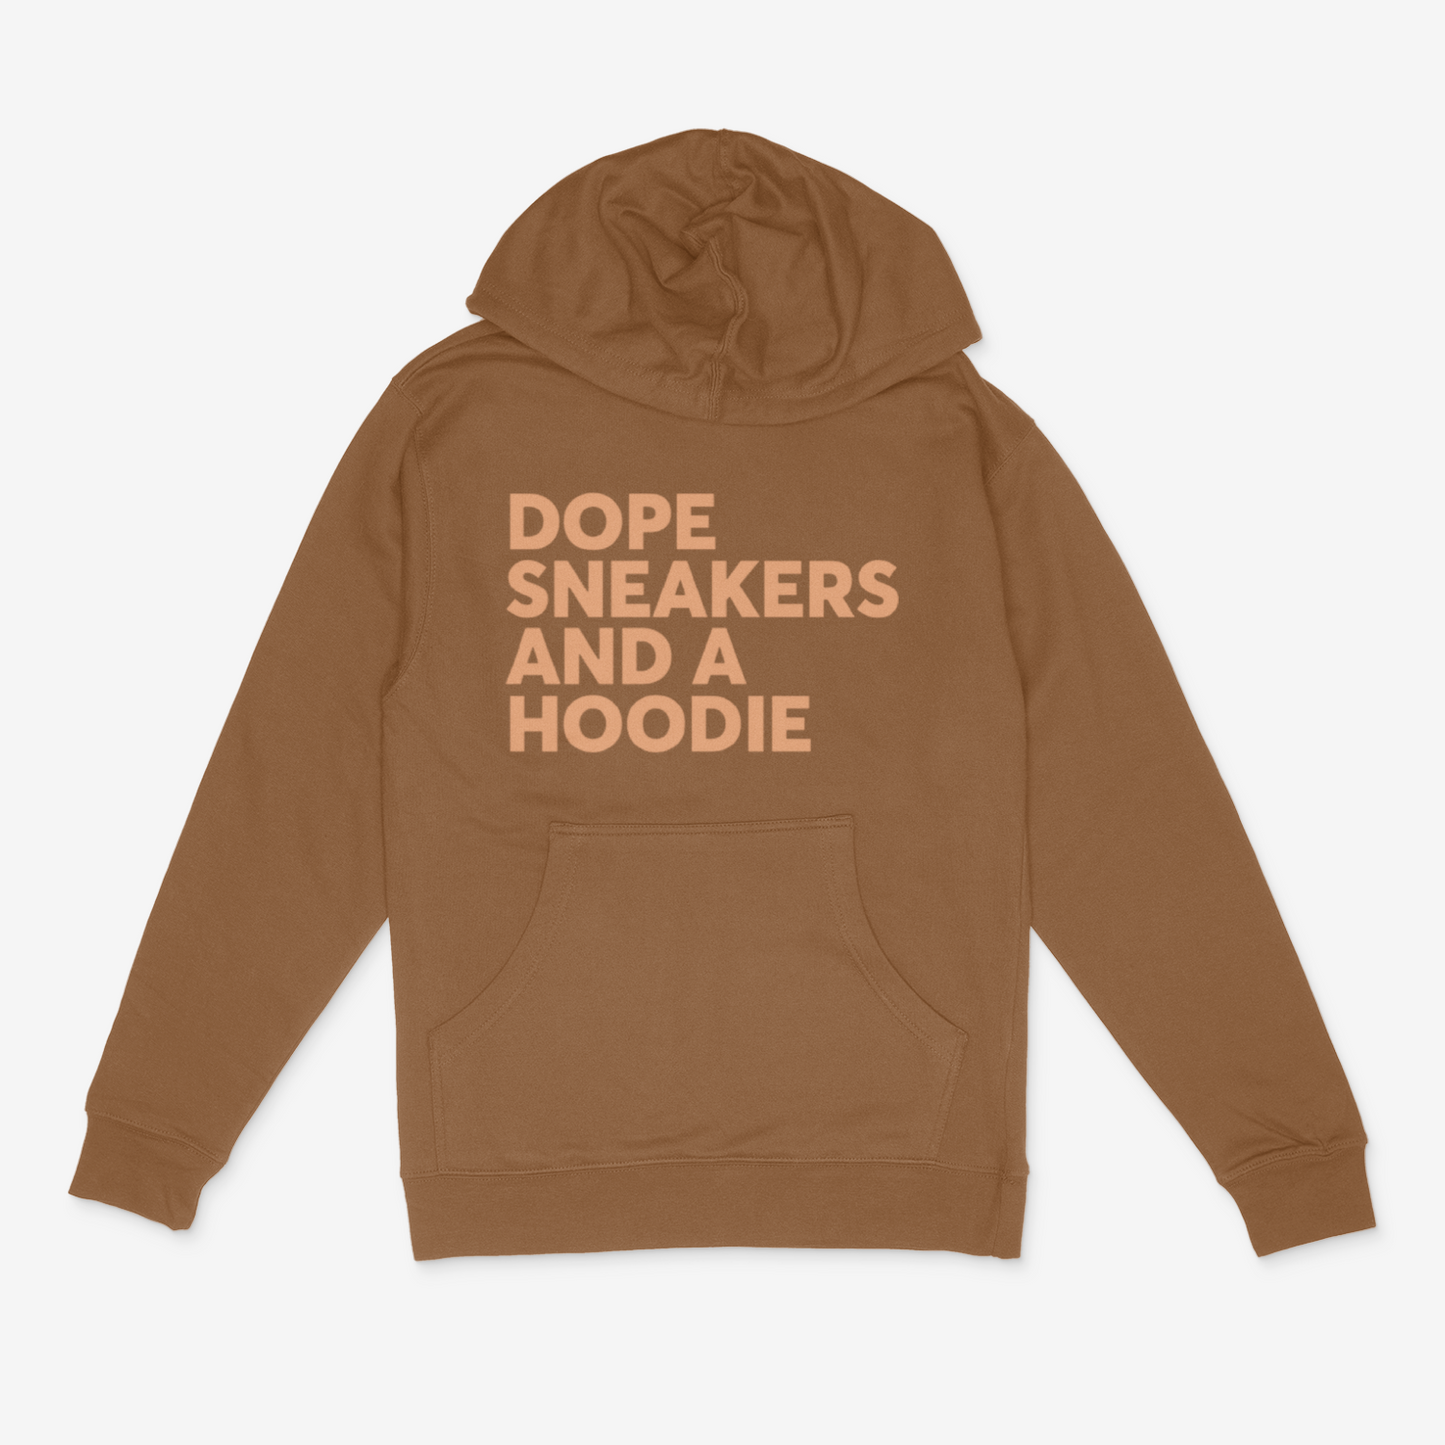 Dope Sneakers and a Hoodie (Tan)